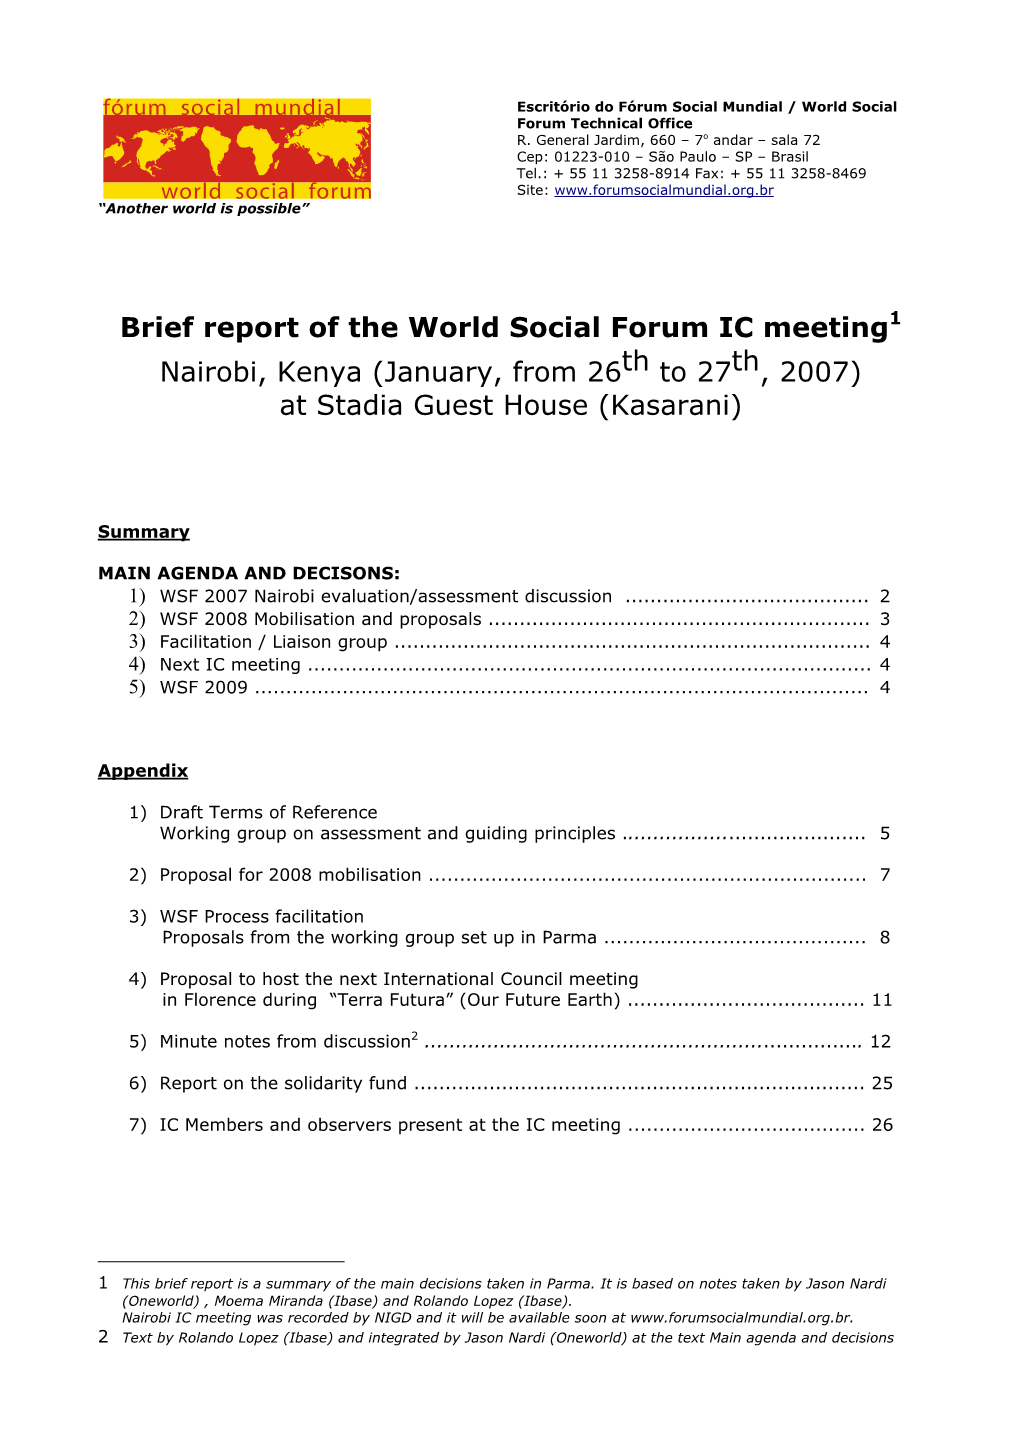 Brief Report of the World Social Forum IC Meeting1 Nairobi, Kenya (January, from 26Th to 27Th, 2007) at Stadia Guest House (Kasarani)